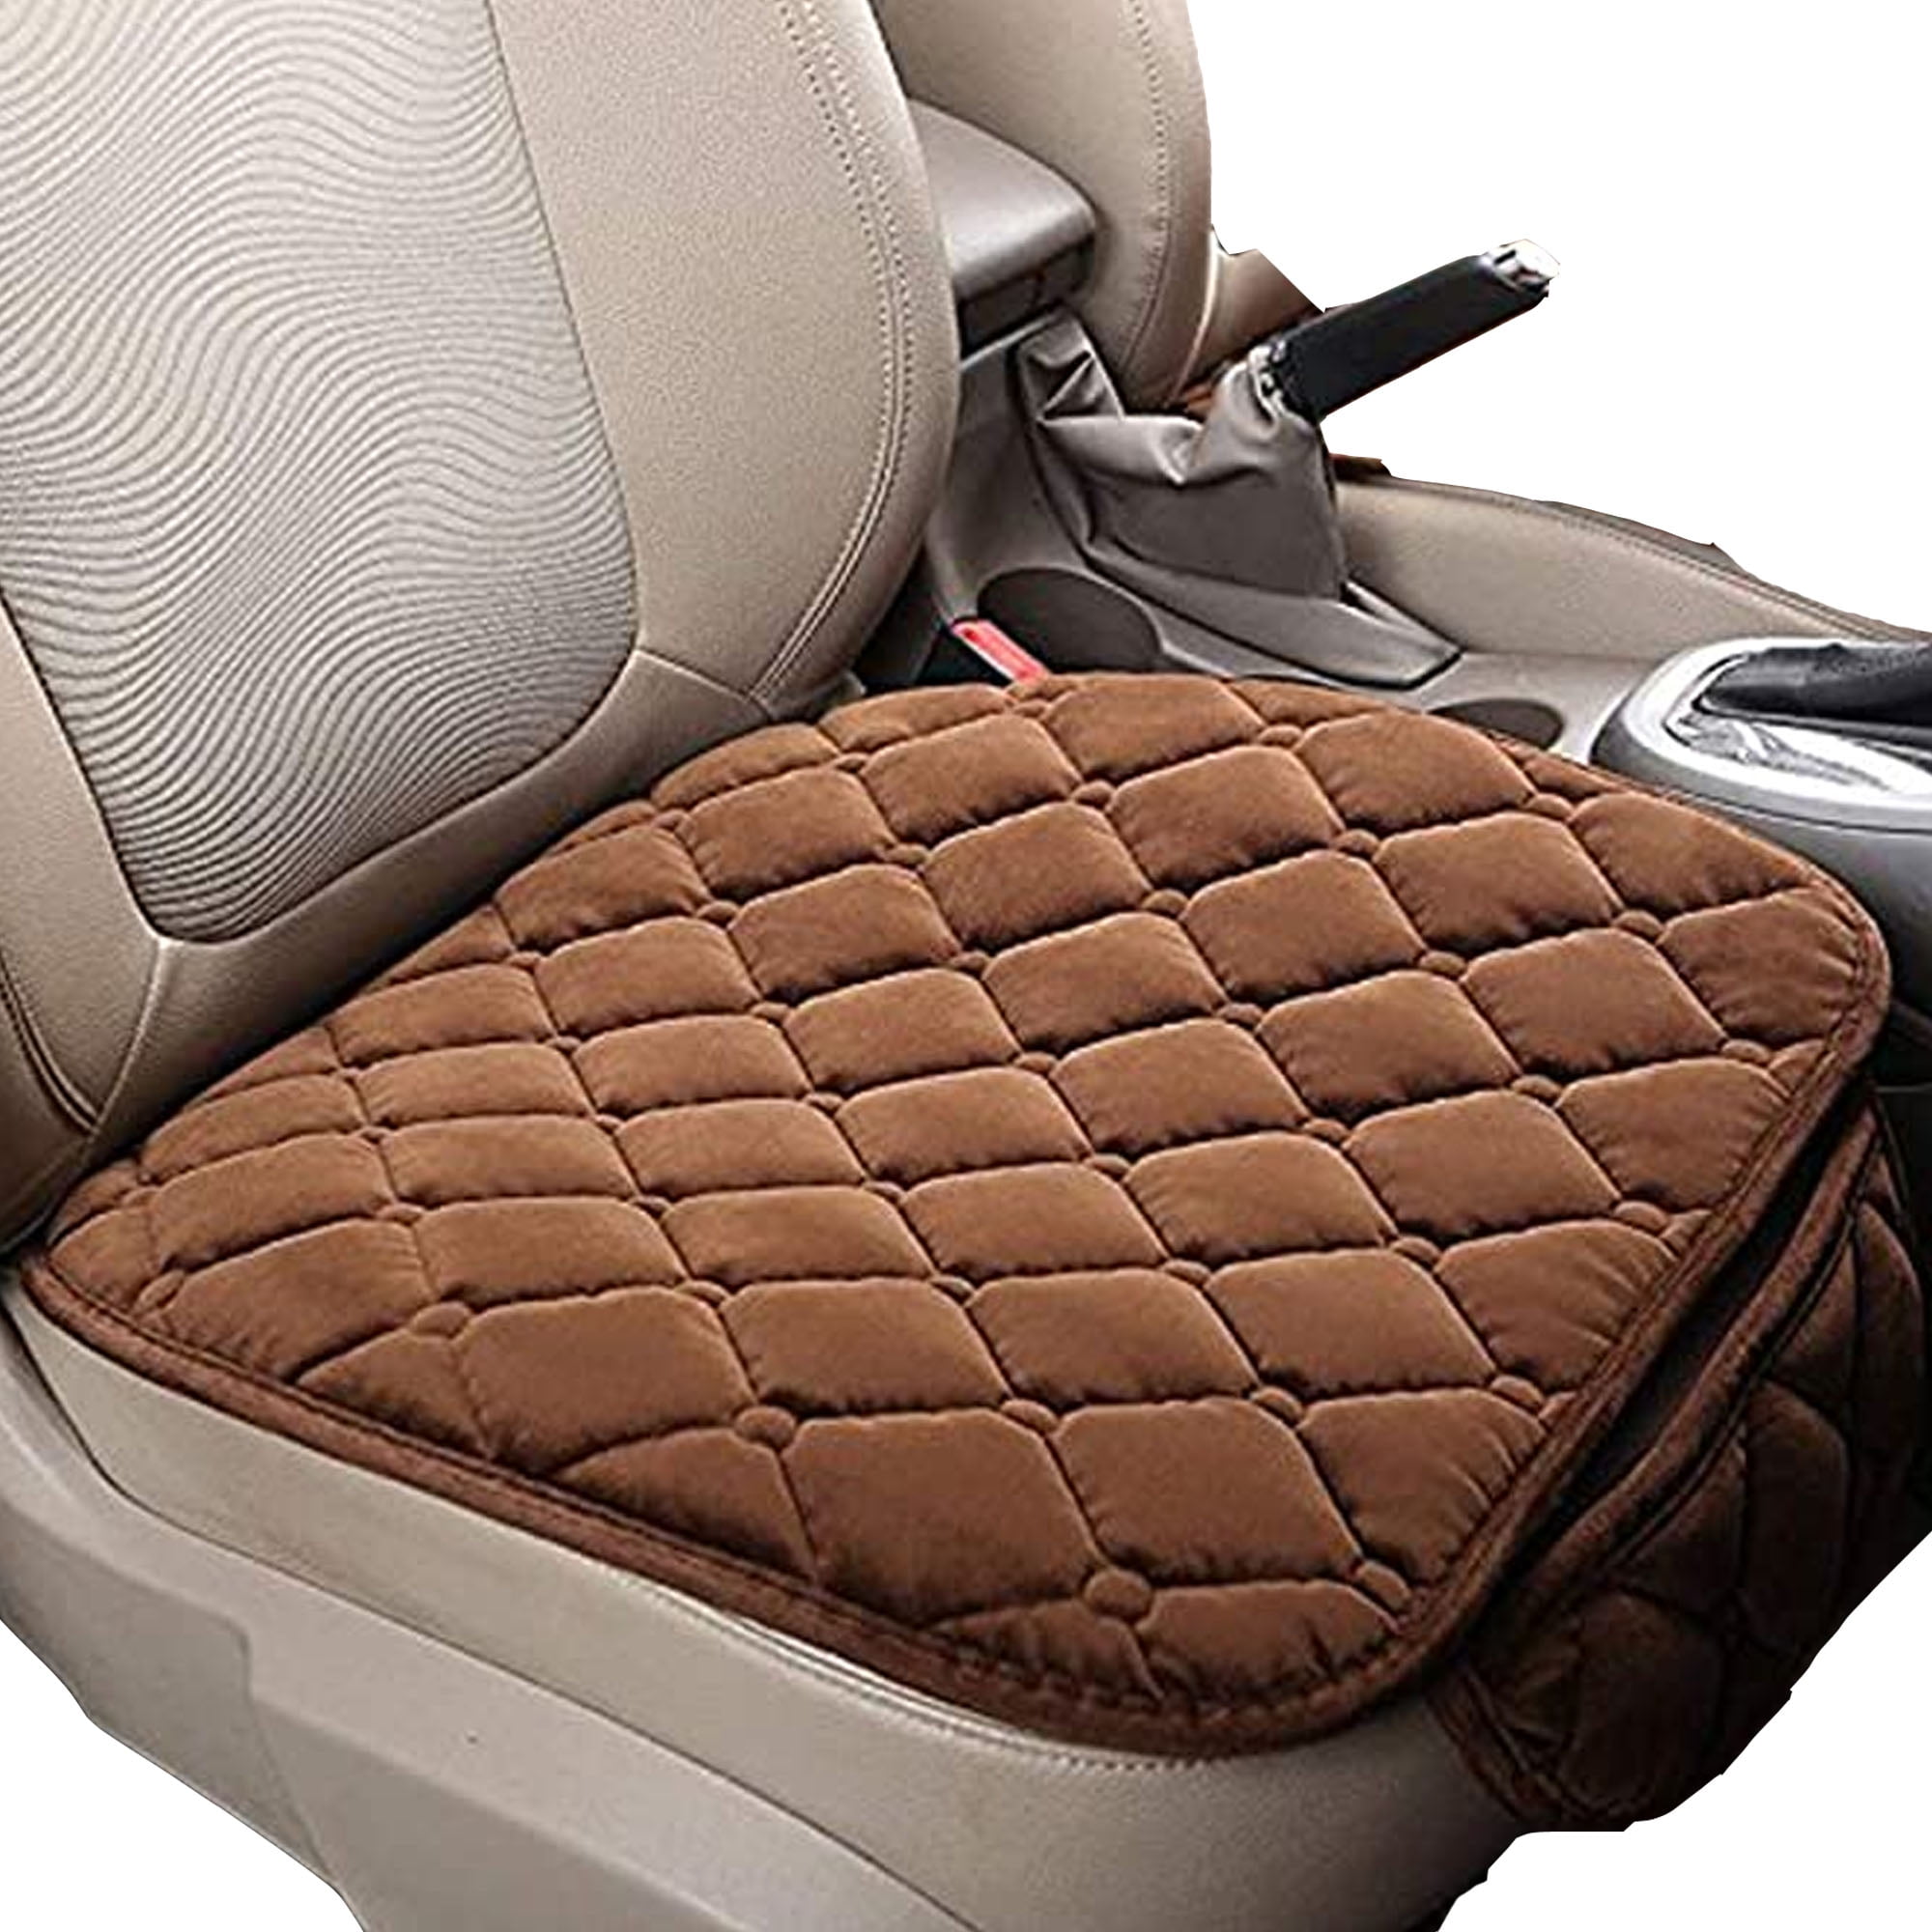 2pc Front Car Seat Covers 100% Waterproof Universal Cushion Mat Protector H6C0